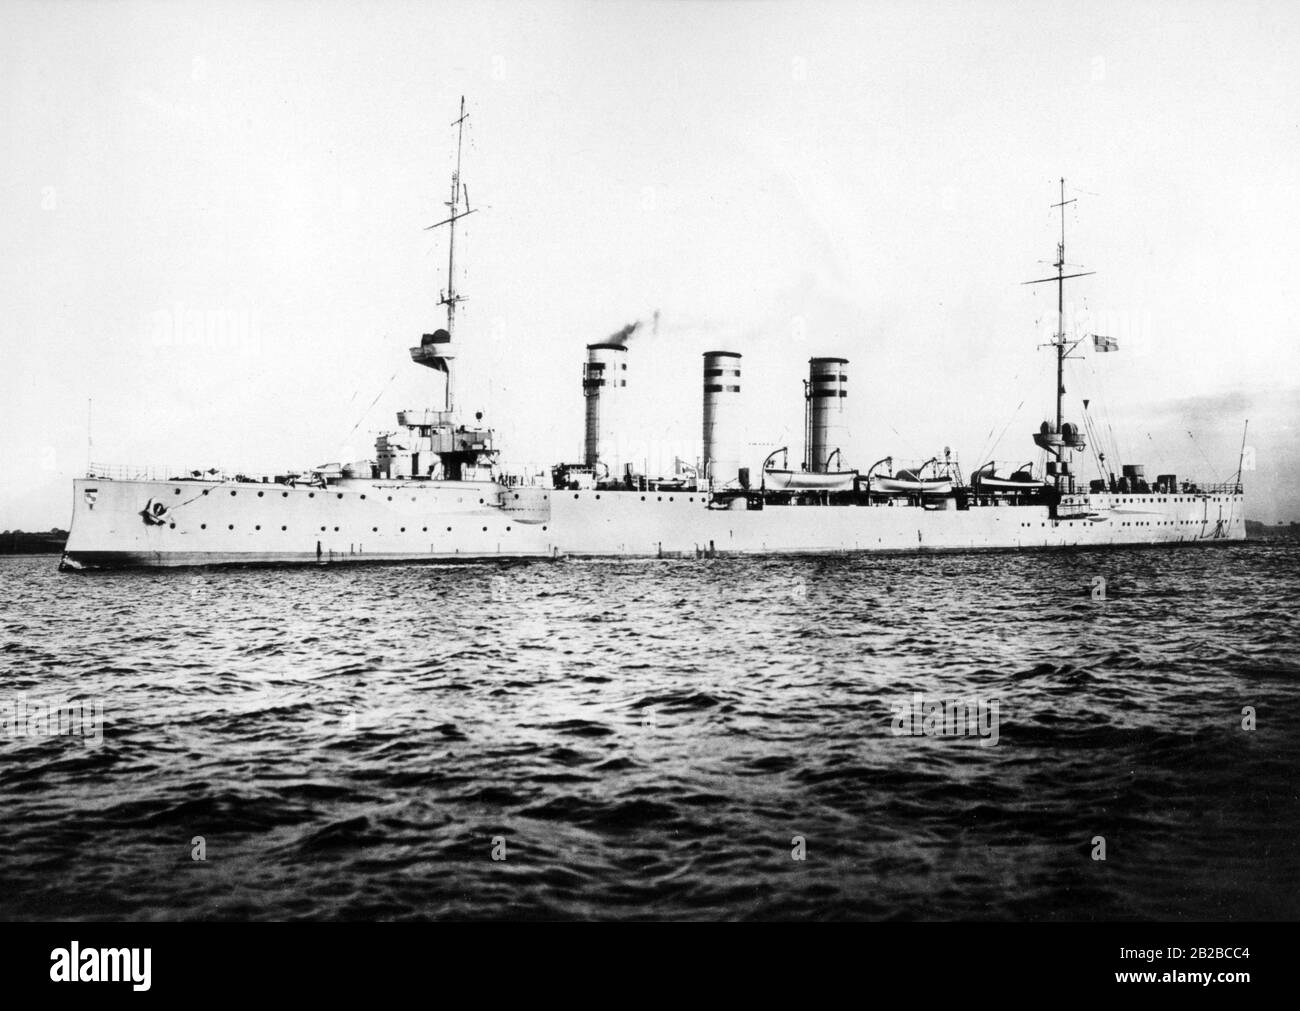 The SMS Mainz, a light cruiser of the Imperial Navy, which was used in the First World War. It was sunk by British warships in August 1914 in the first naval battle near Helgoland. Stock Photo